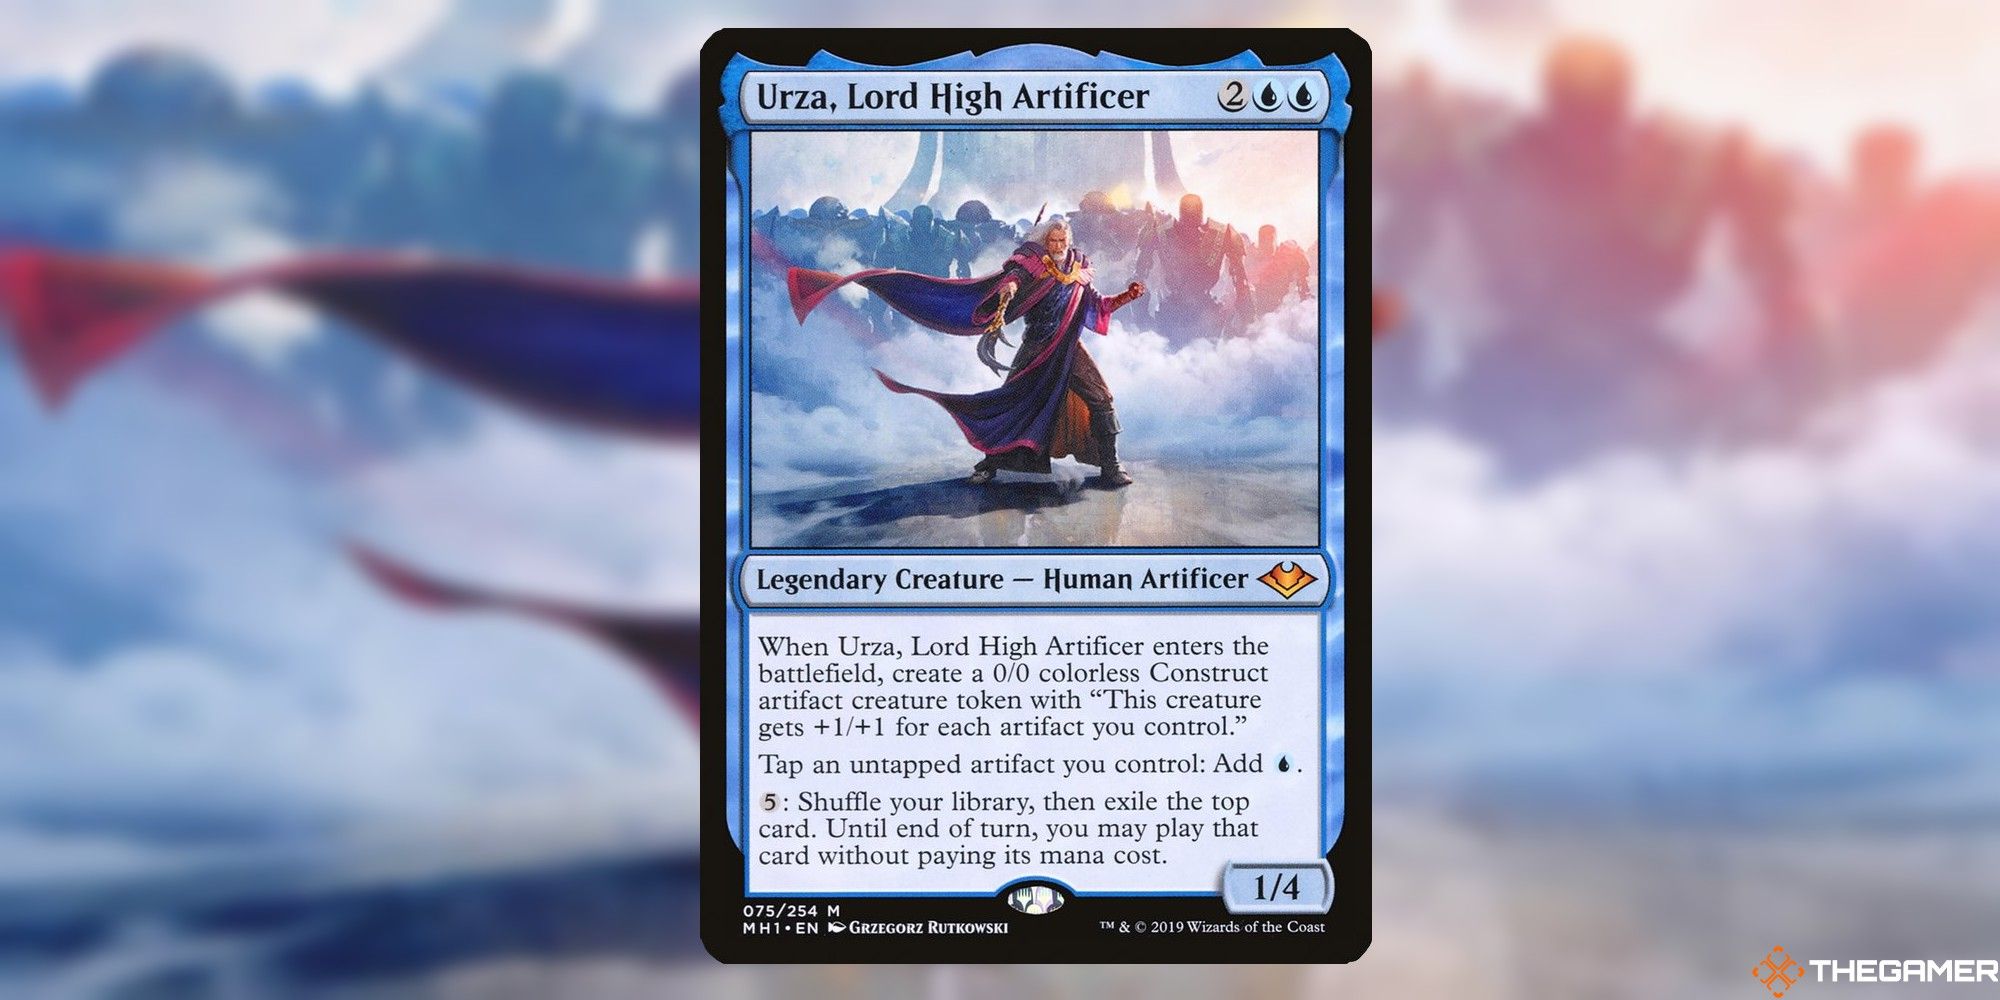 Urza, Lord High Artificer card and art background